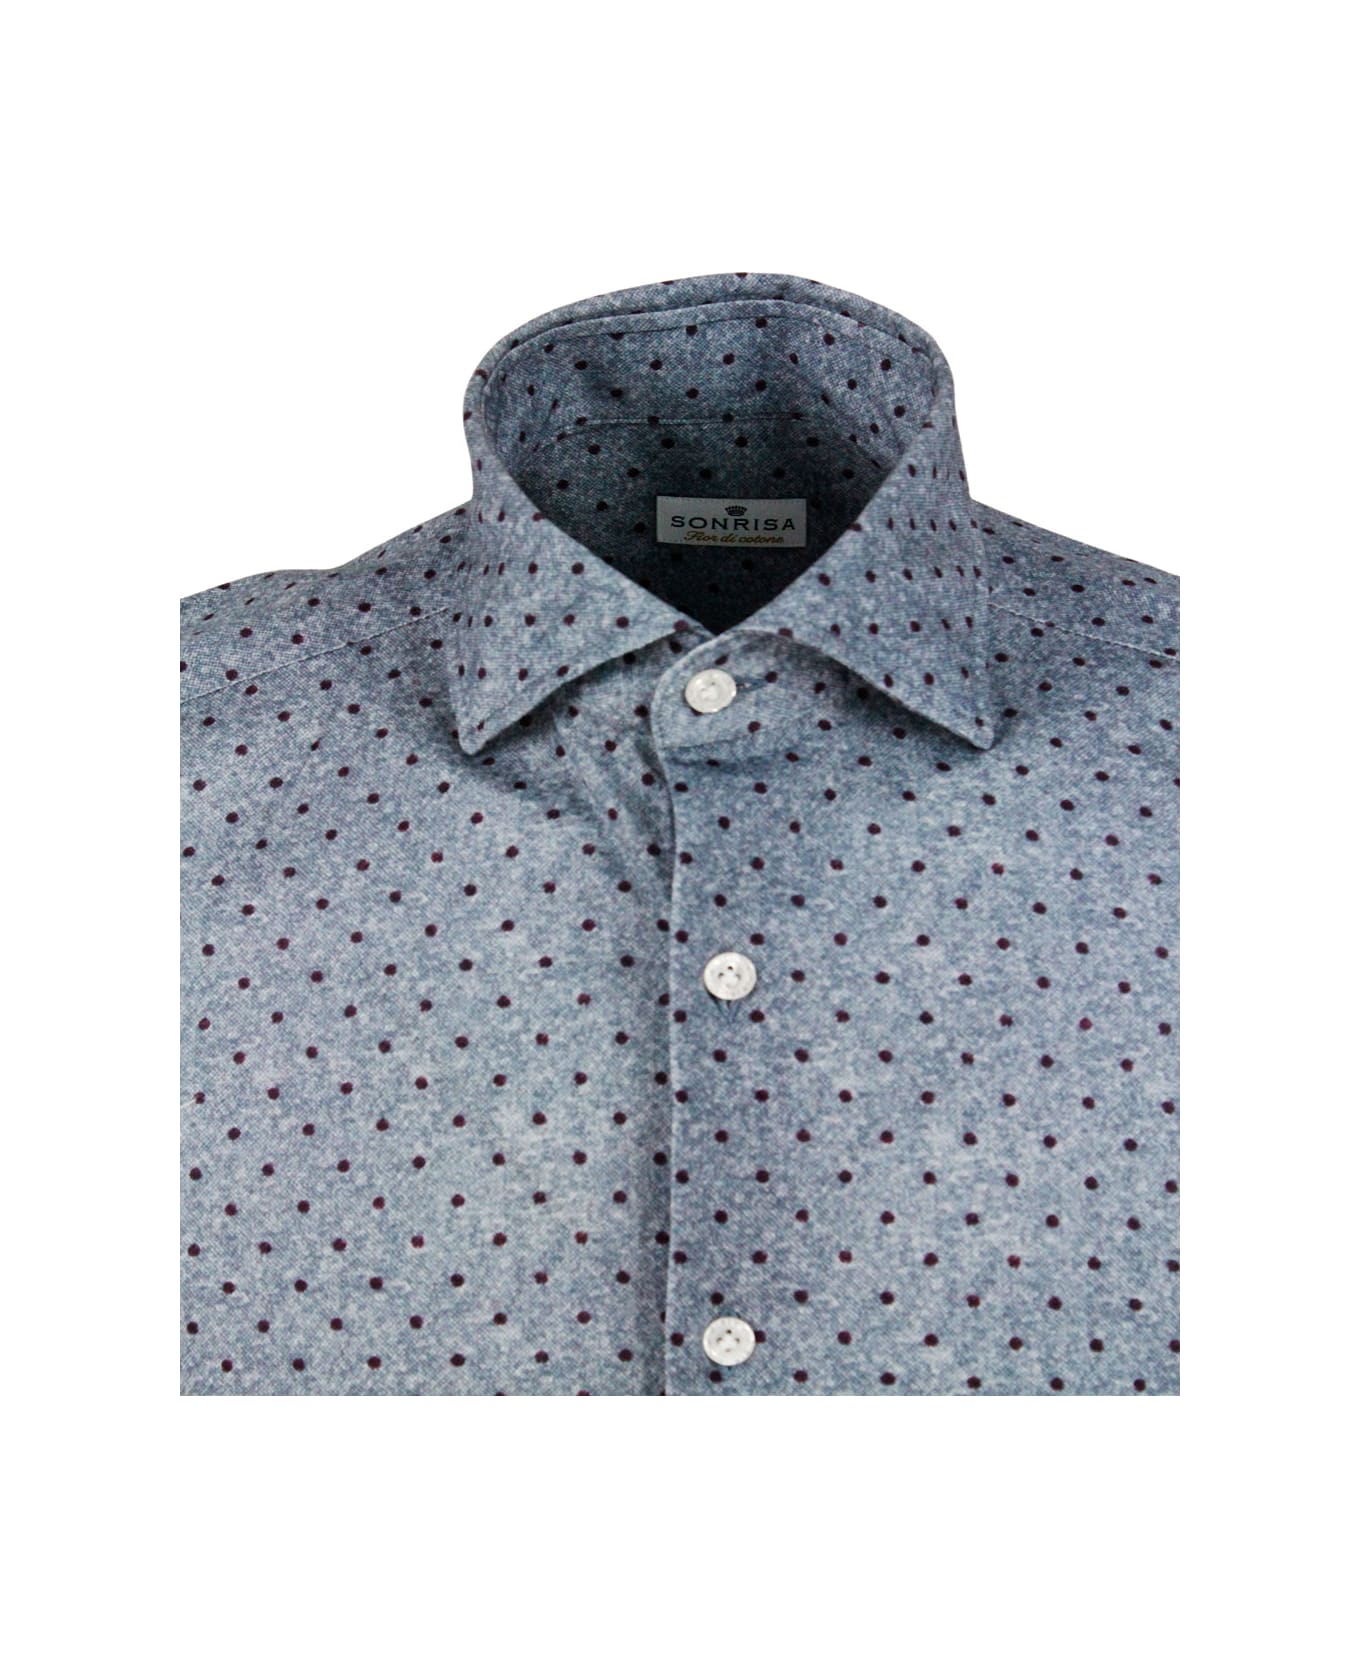 Sonrisa Luxury Shirt In Soft, Precious And Very Fine Stretch Cotton Flower With French Collar In Small Polka Dot Print In Burgundy Color - Blu